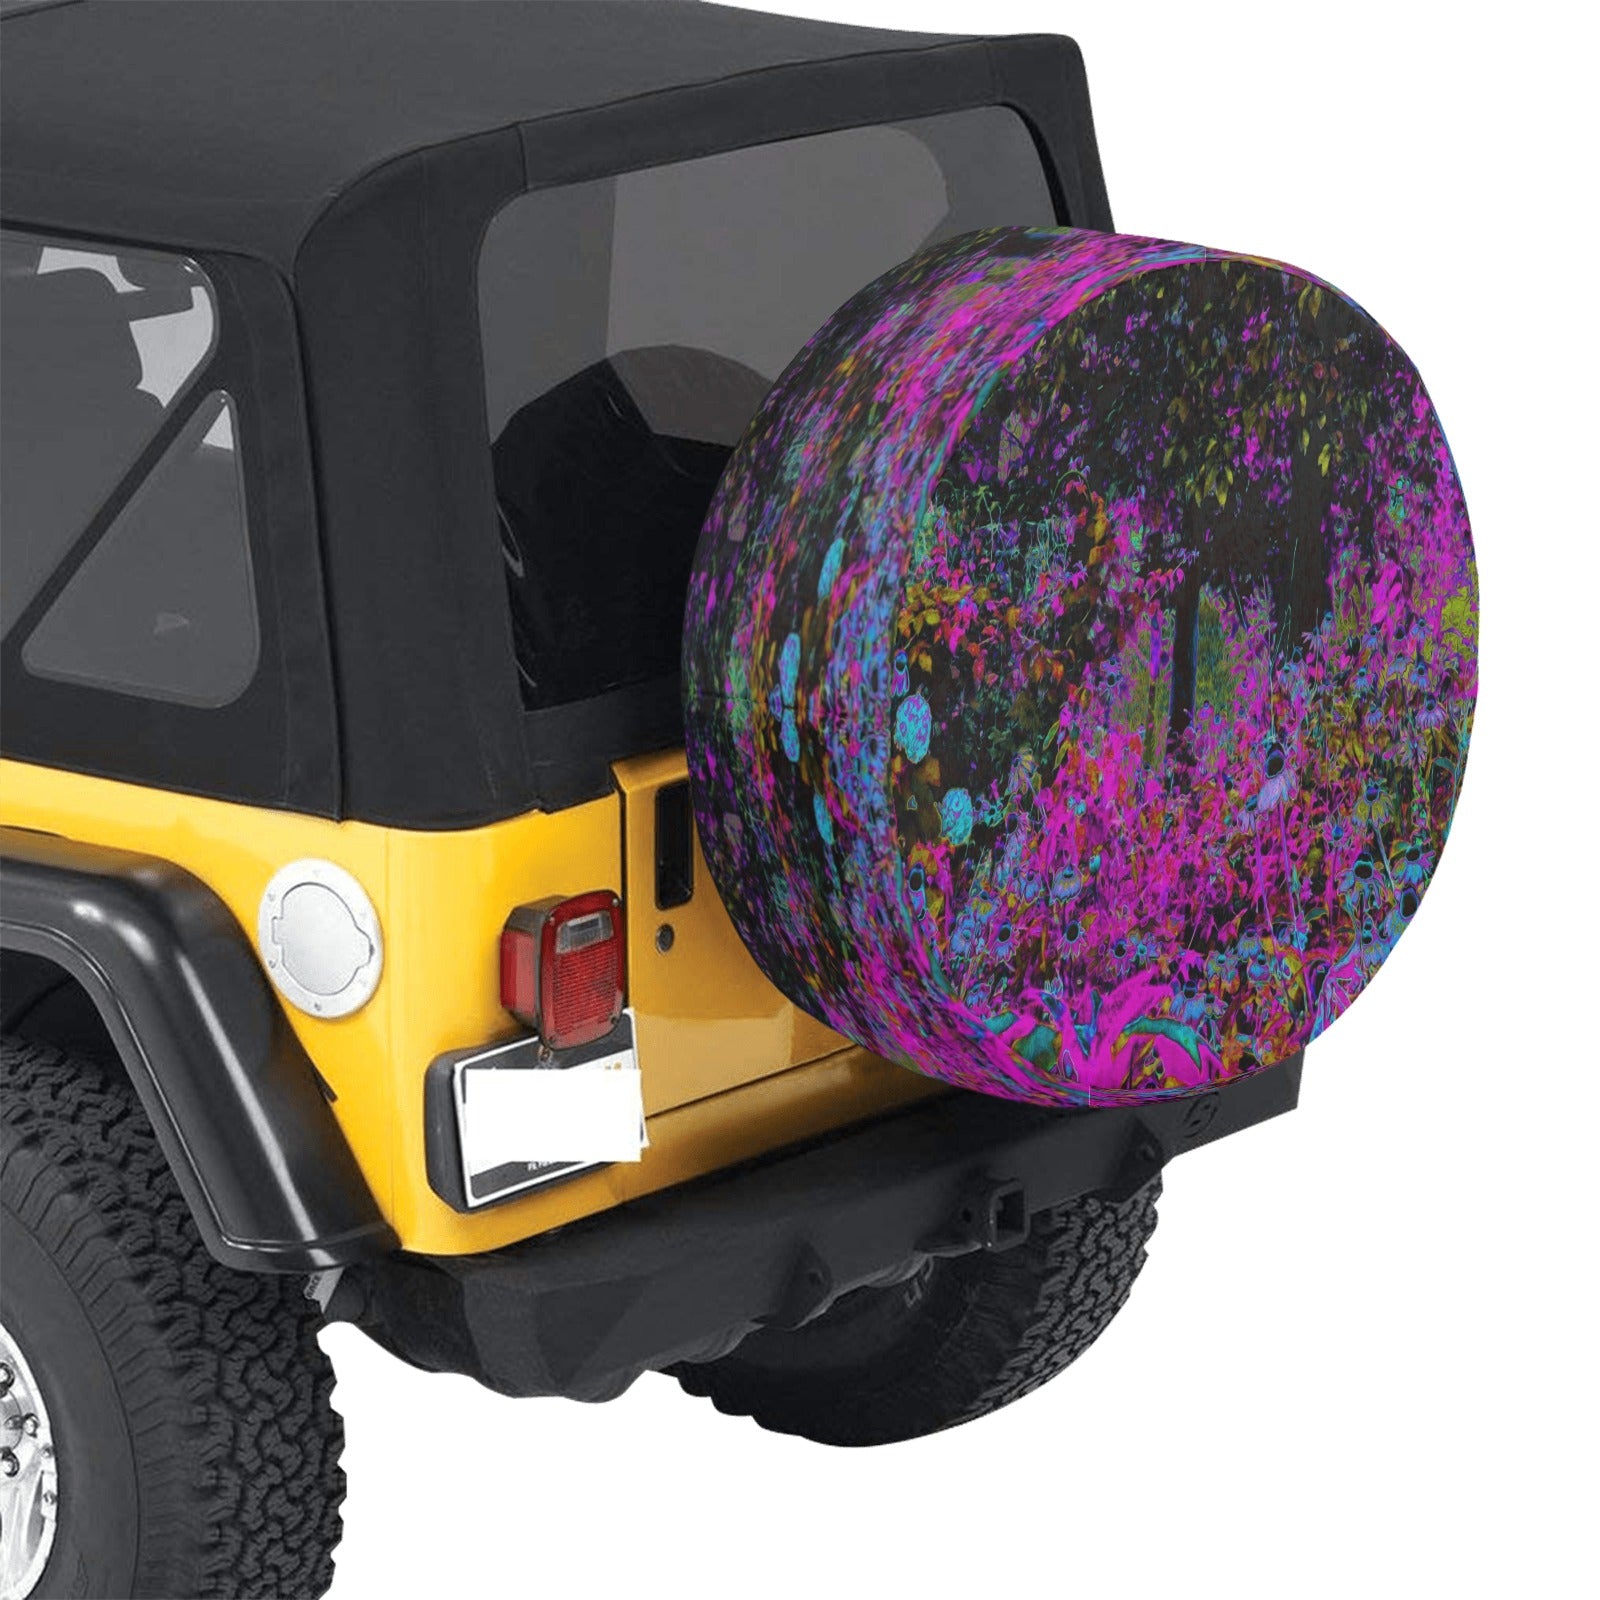 Spare Tire Covers, Psychedelic Hot Pink and Black Garden Sunrise - Large